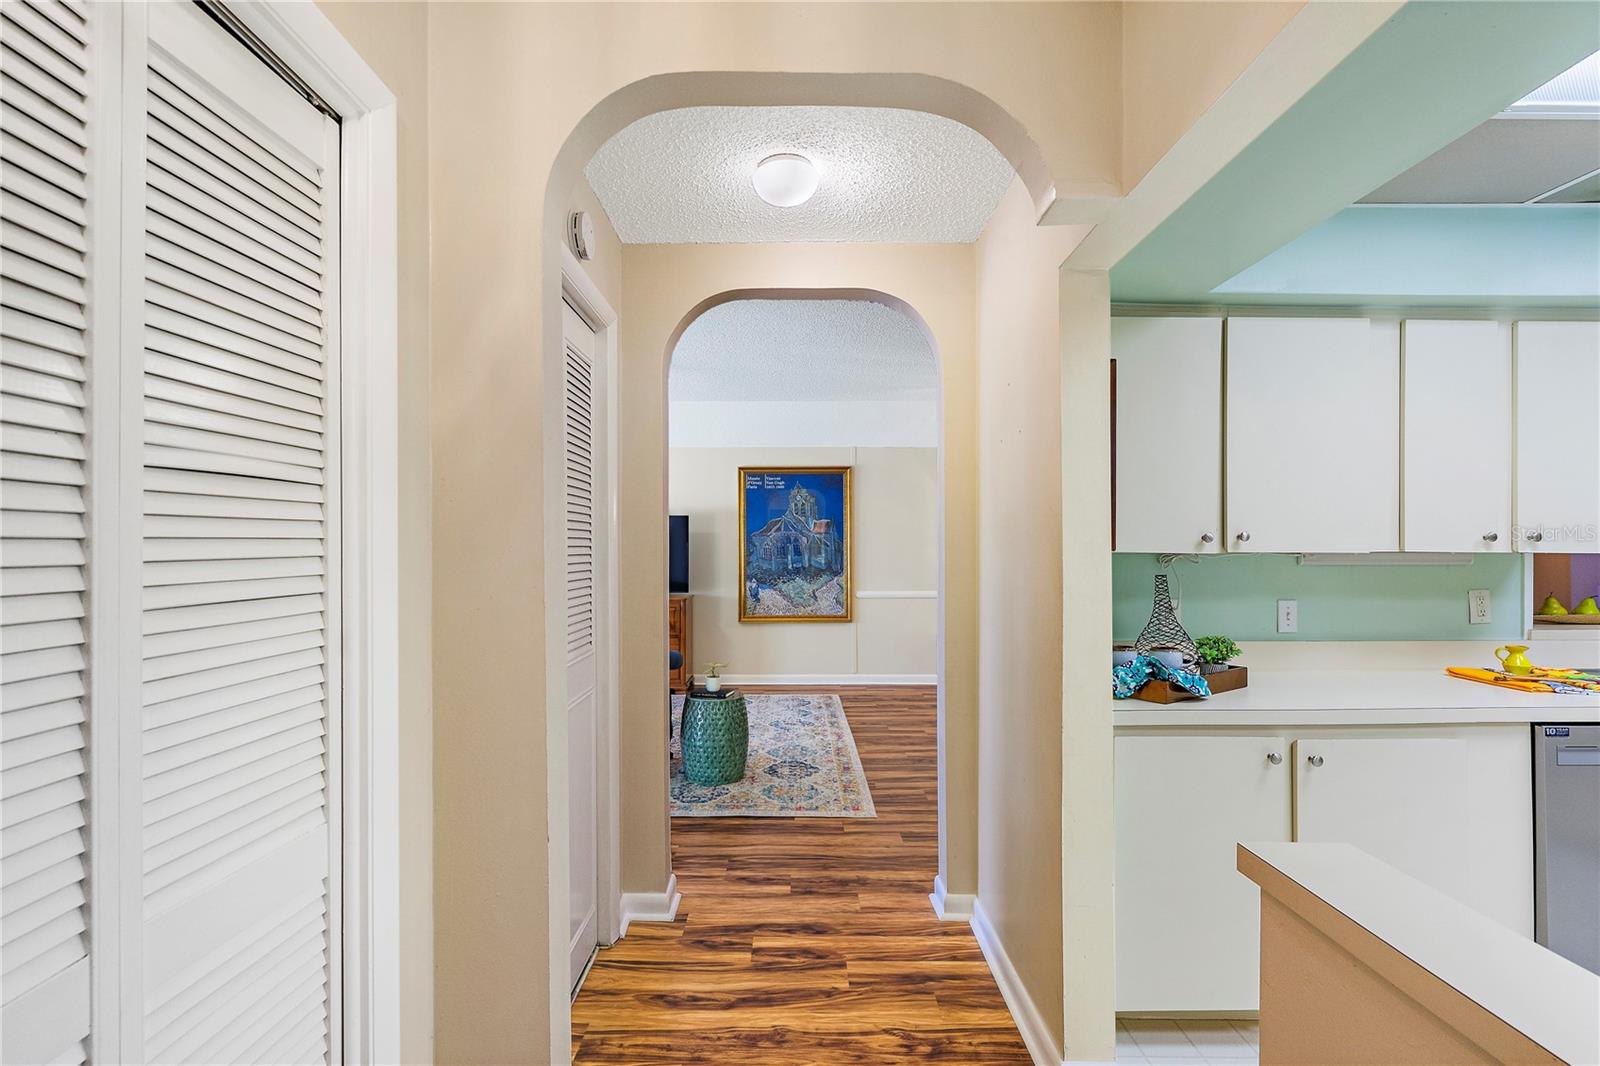 Foyer with storage closet and pantry